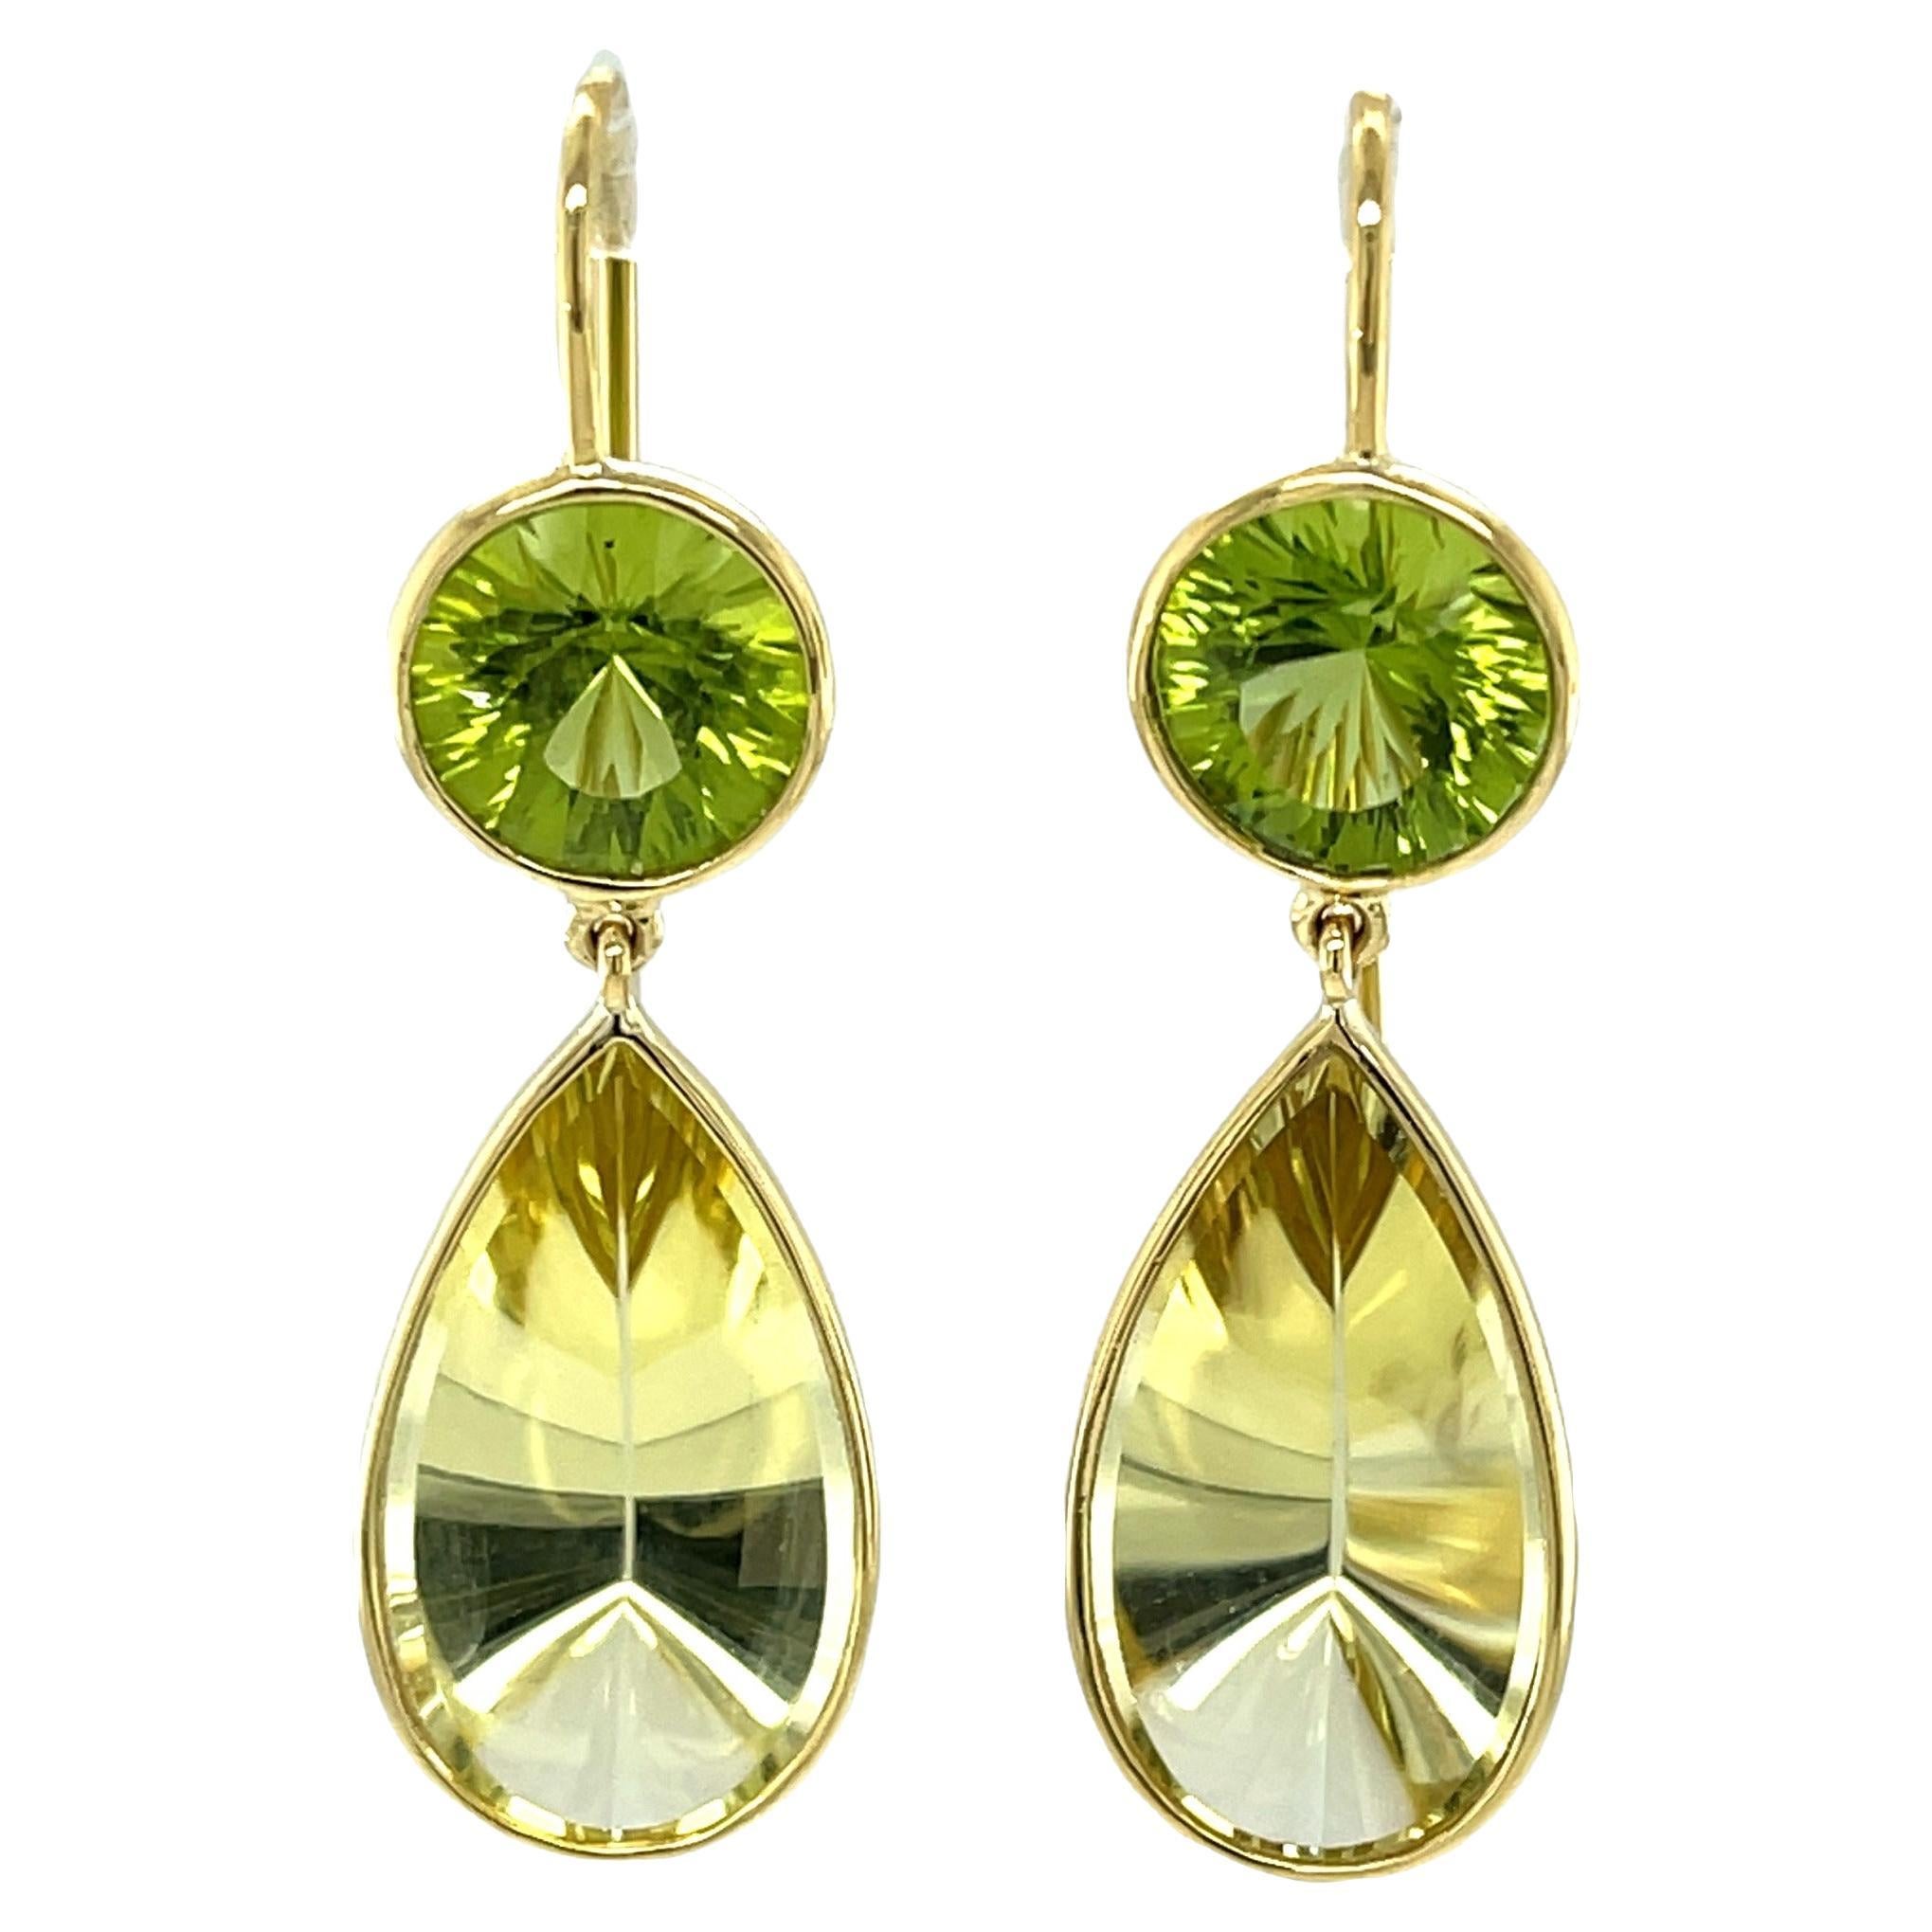 Fantasy Cut Citrine, Peridot Dangle Earrings in Yellow Gold, 5.53 Carats Total For Sale